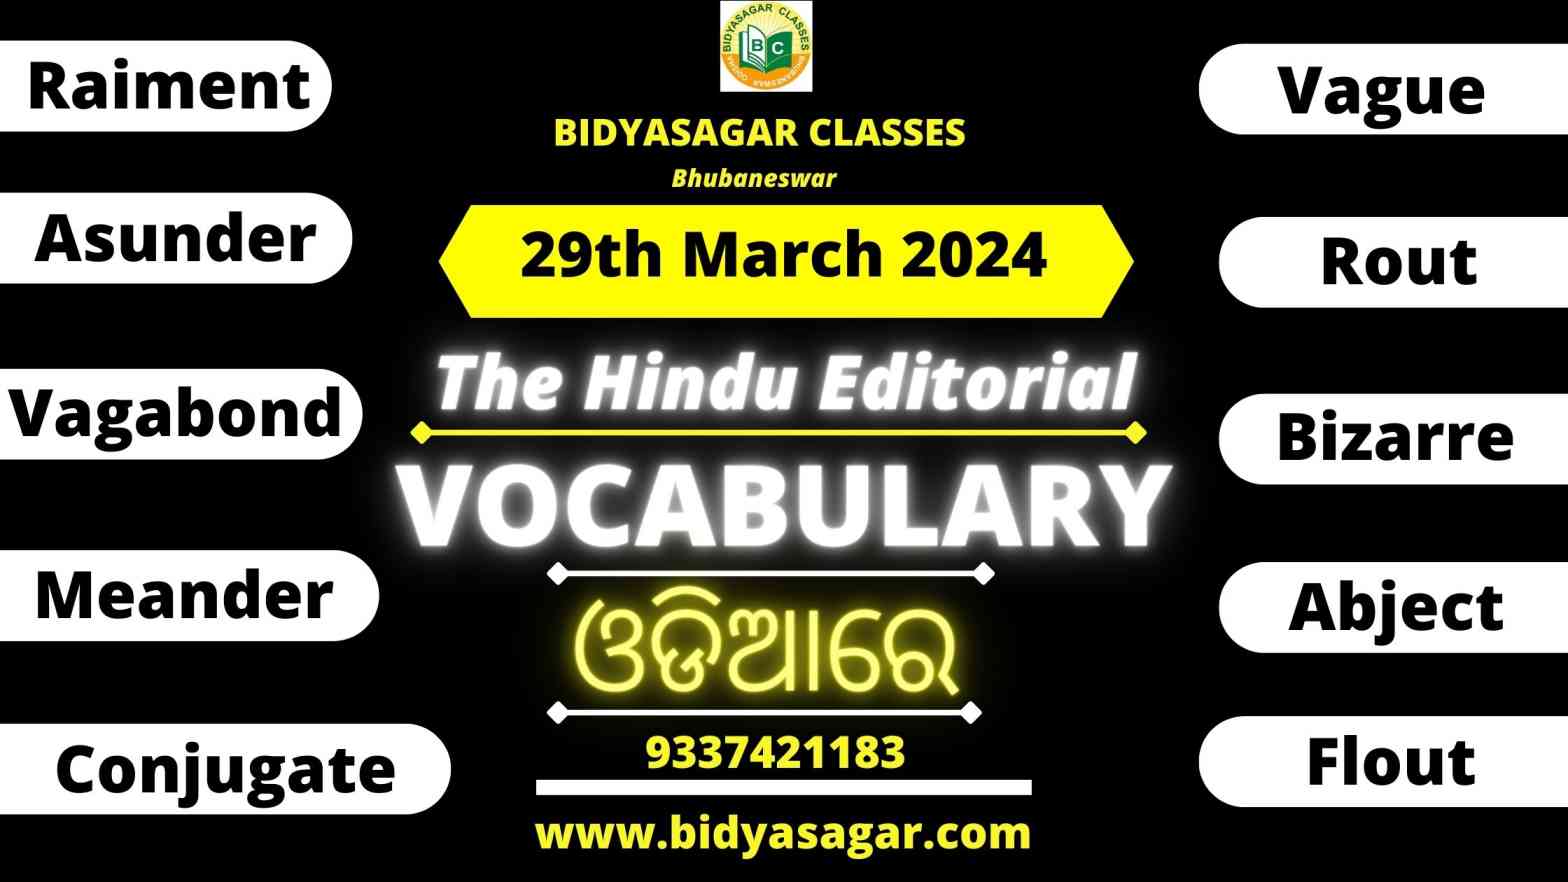 The Hindu Editorial Vocabulary of 29th March 2024